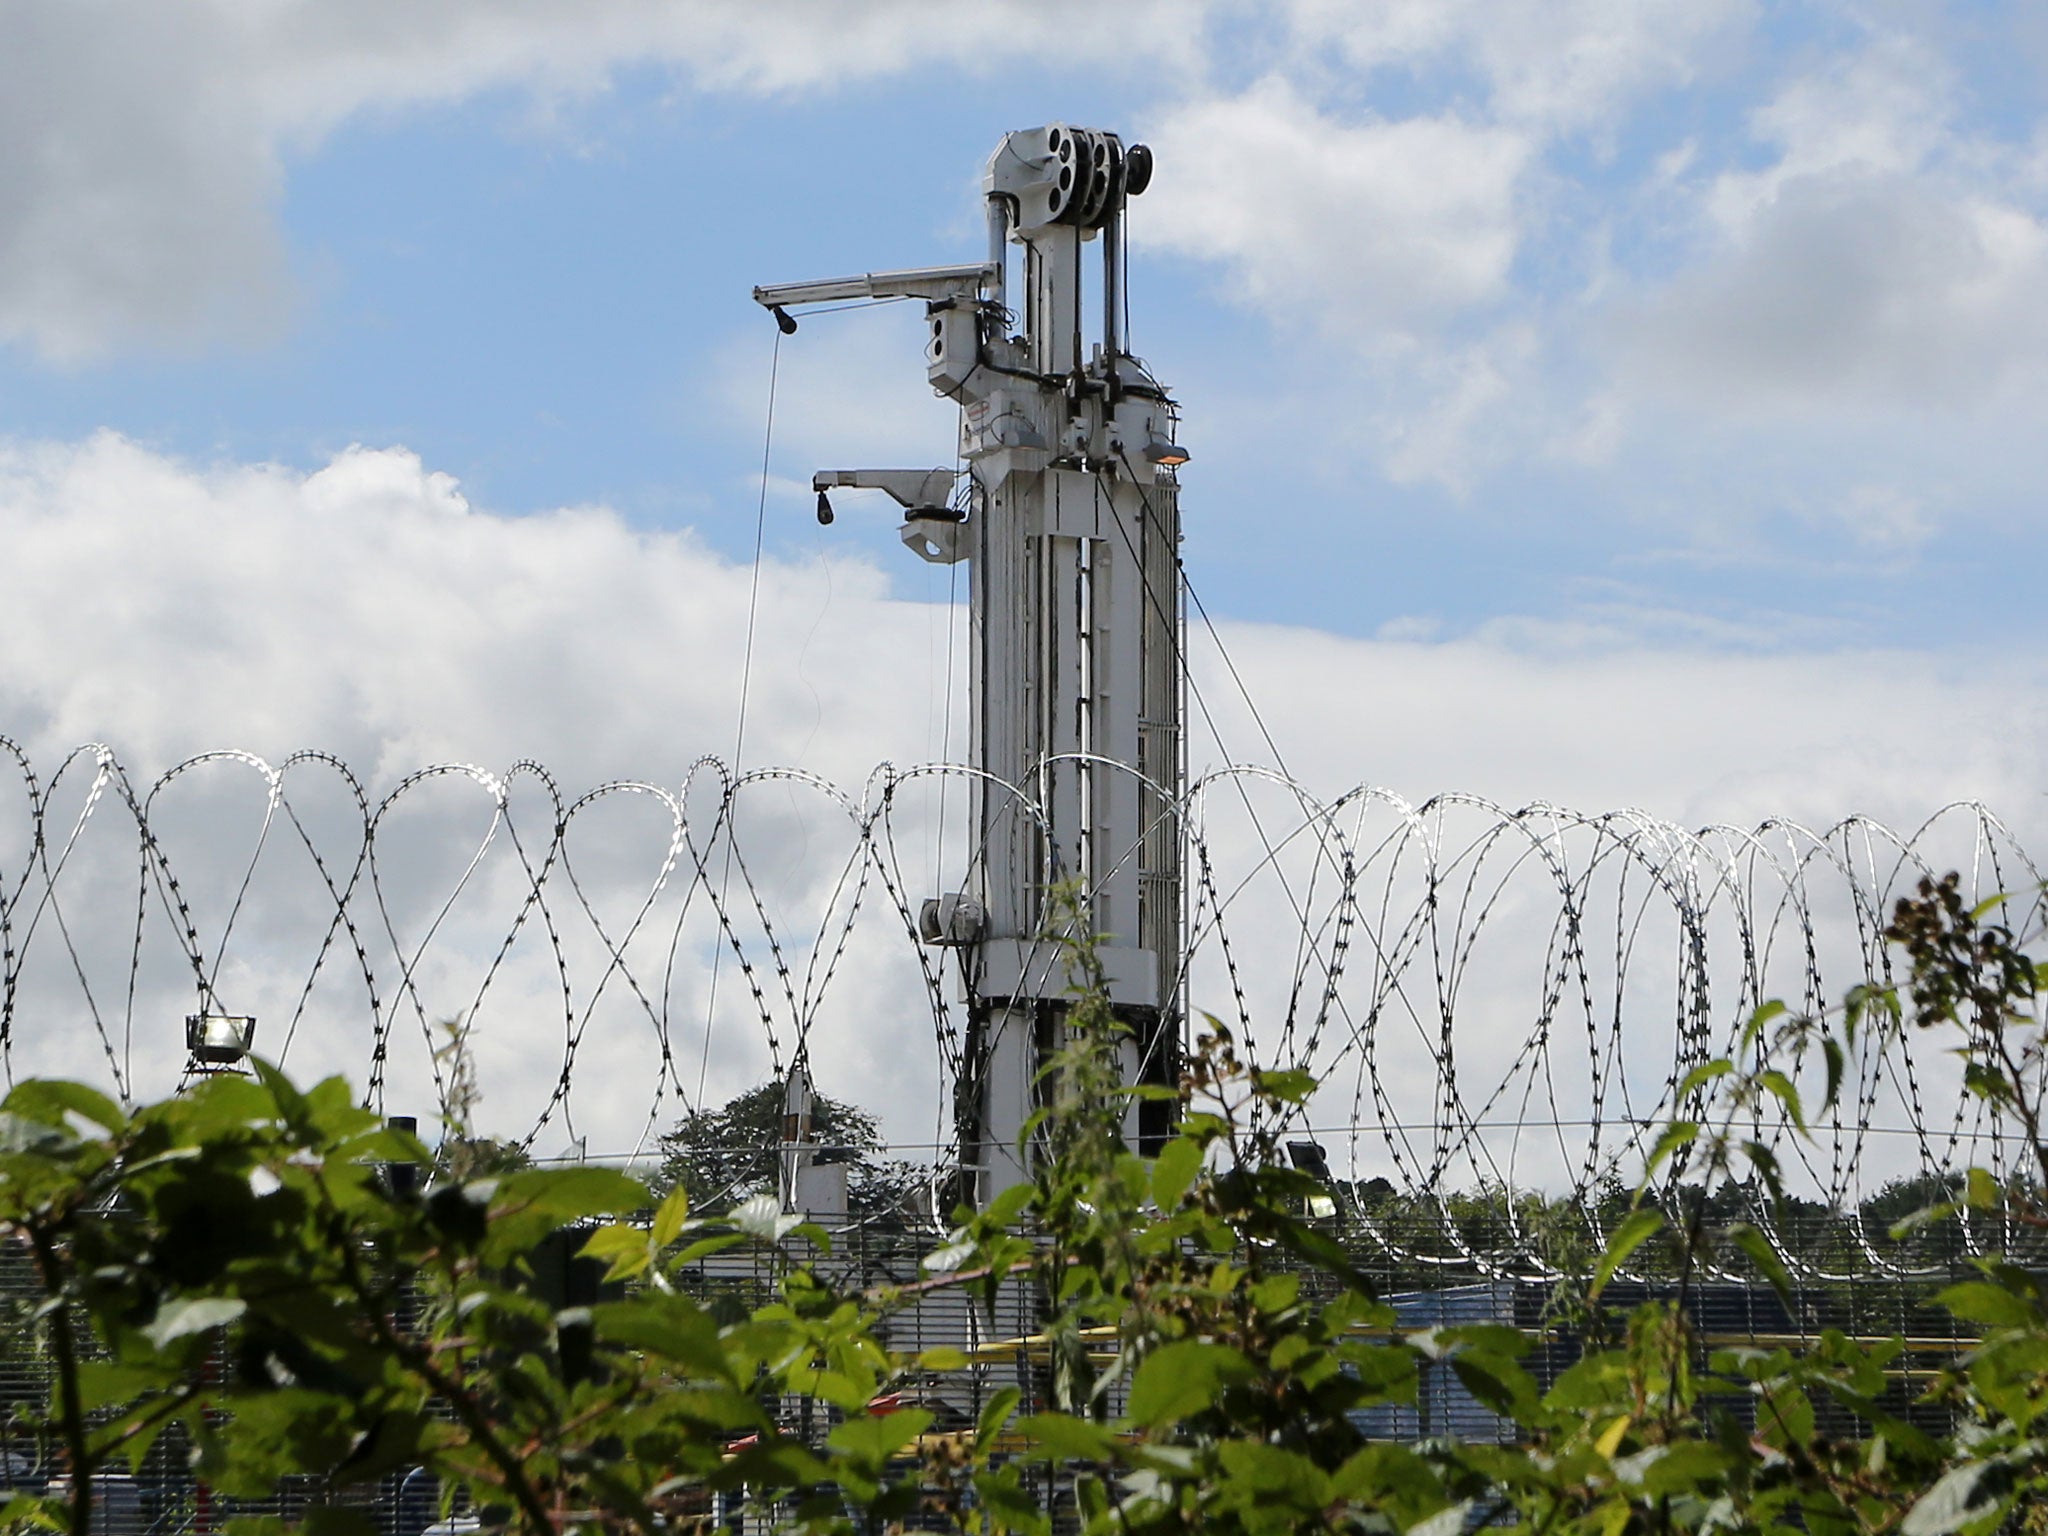 Drilling equipment at the Cuadrilla exploration drilling site in Balcombe (Getty)